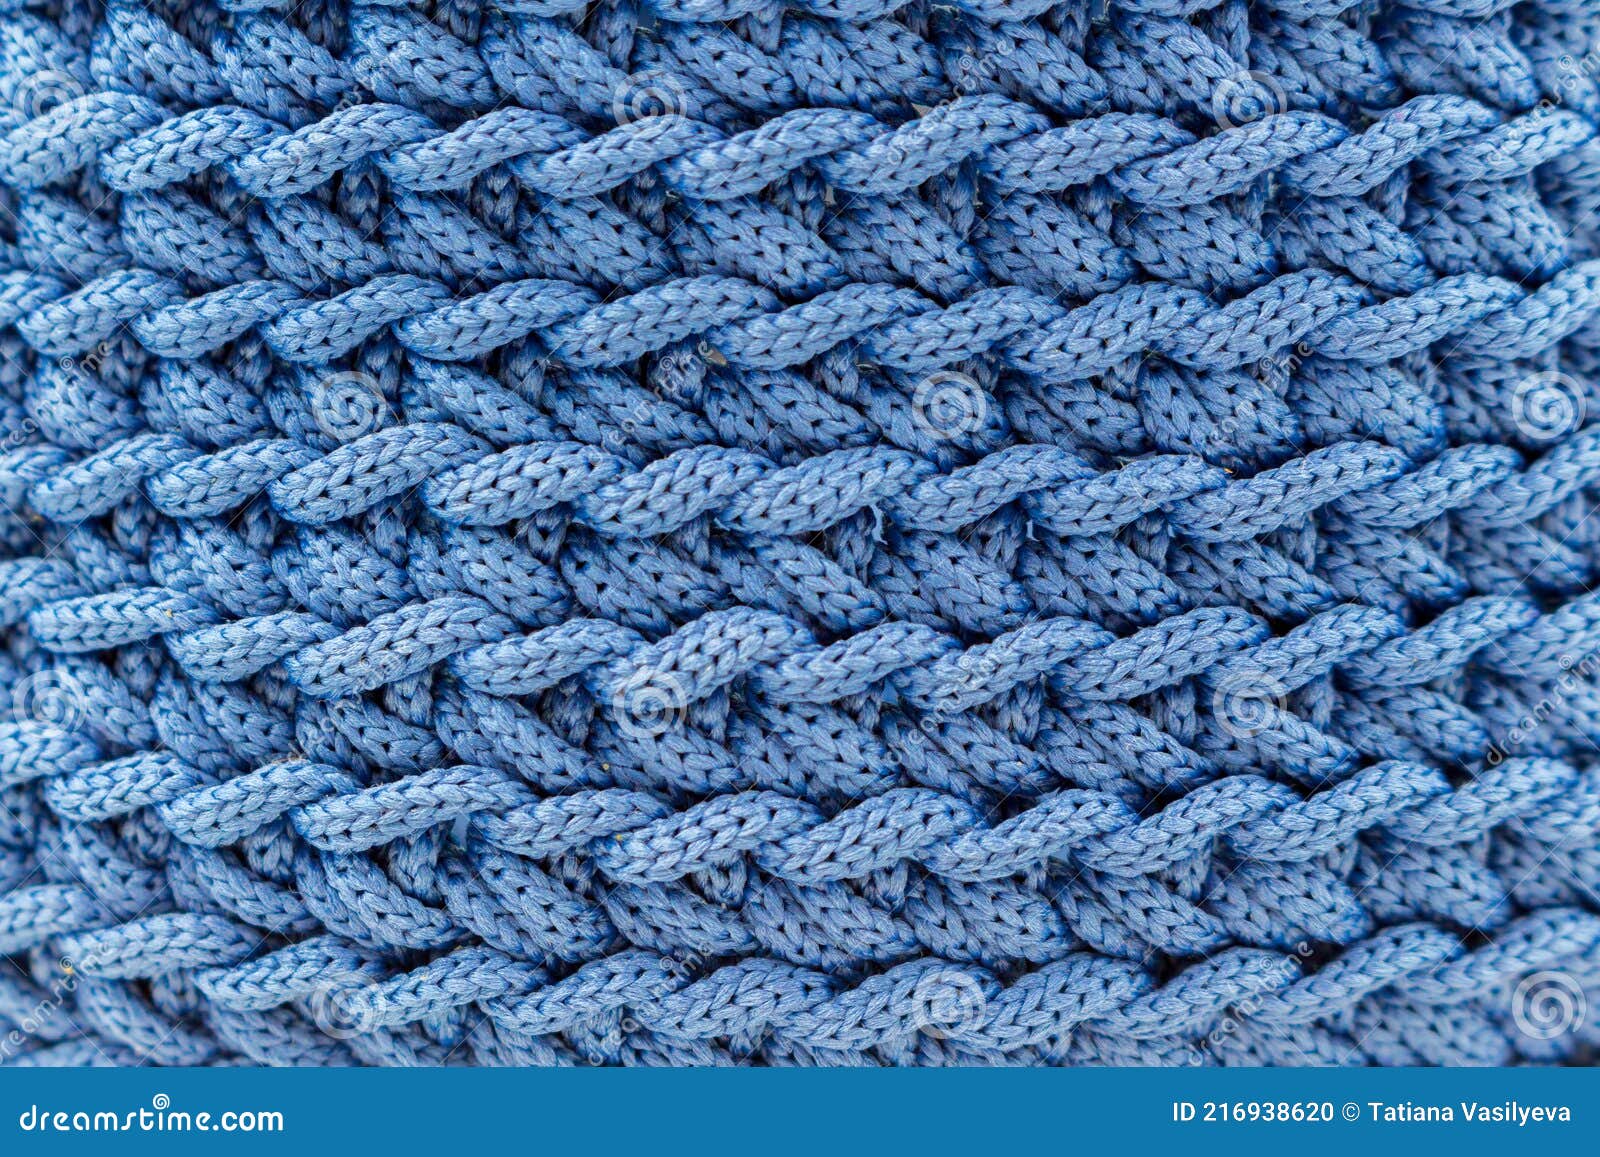 Blue Polyester Cord Knitting Stock Photo - Image of surface